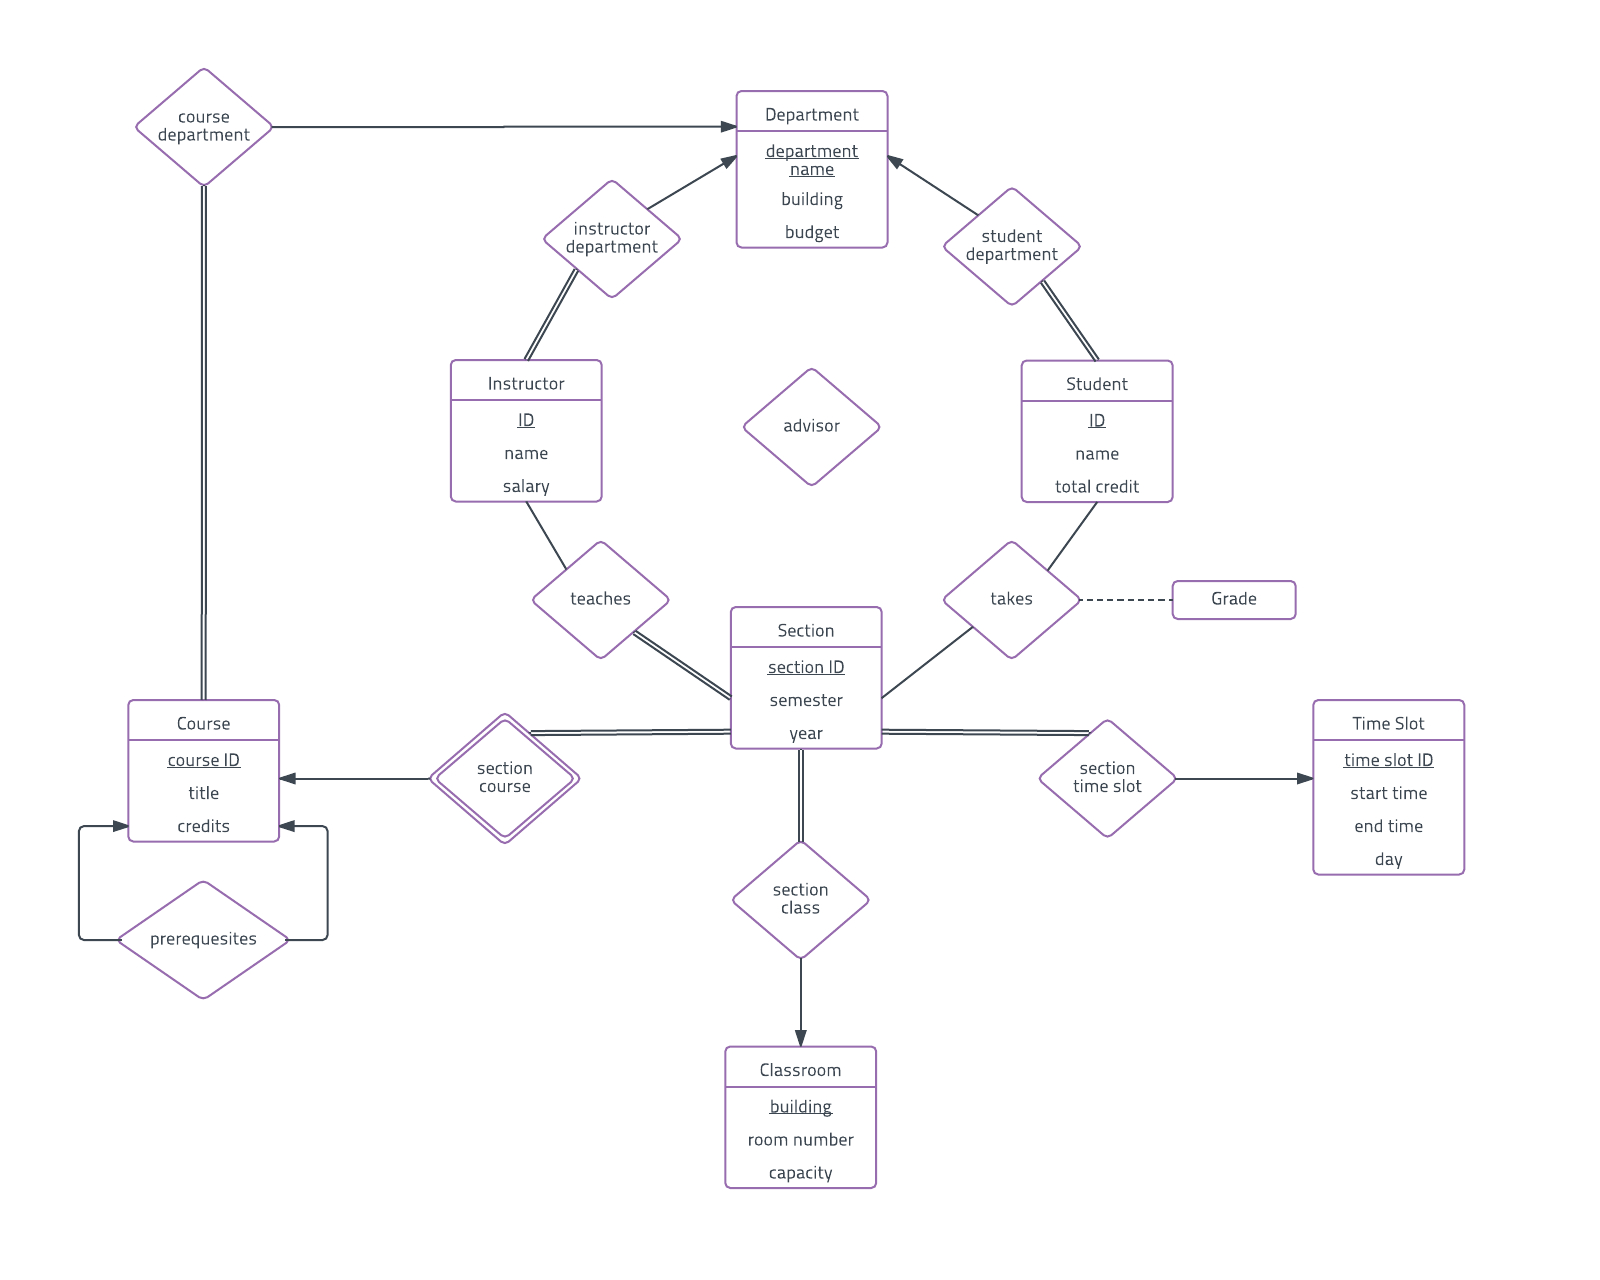 Er Diagram Examples And Templates | Lucidchart in Er Diagram Questions In Dbms